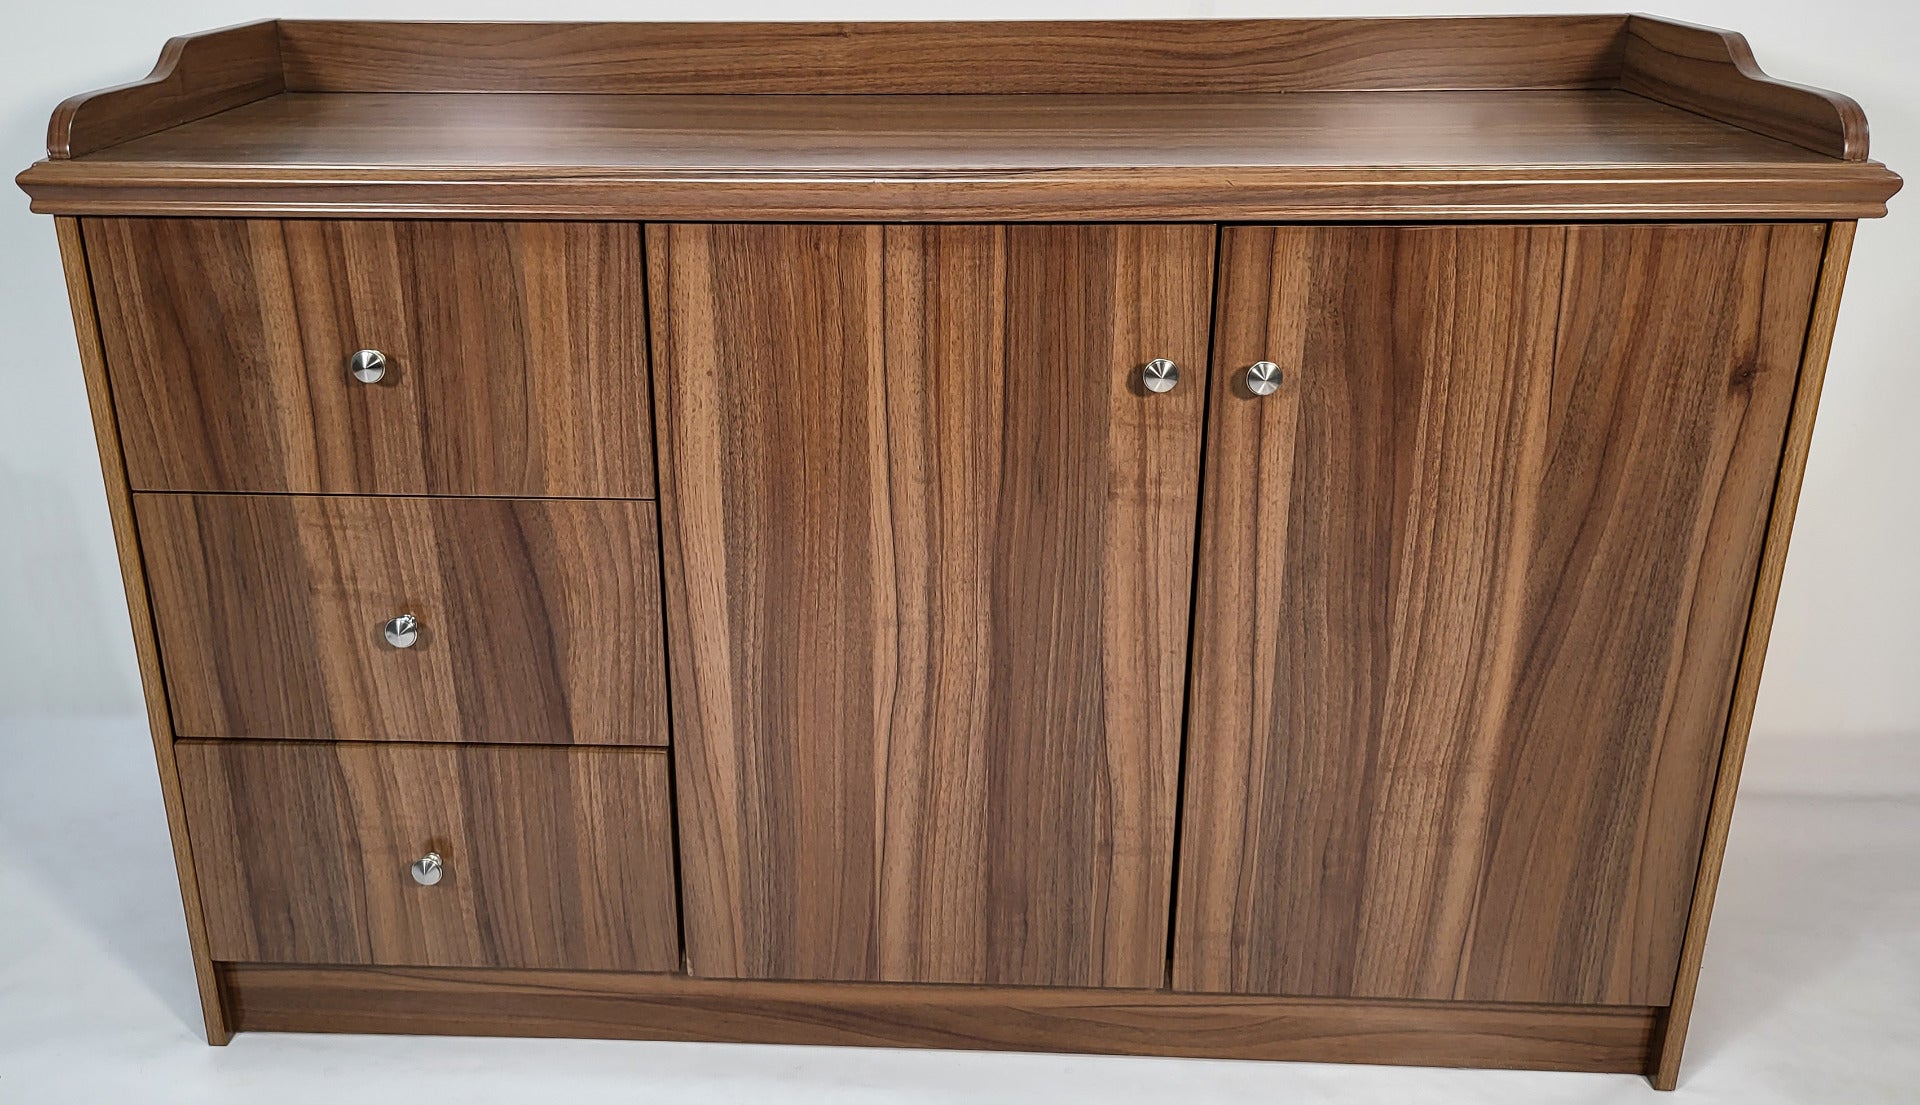 120cm Wide Light Oak Cupboard with Integrated Drawers - 2K01 UK